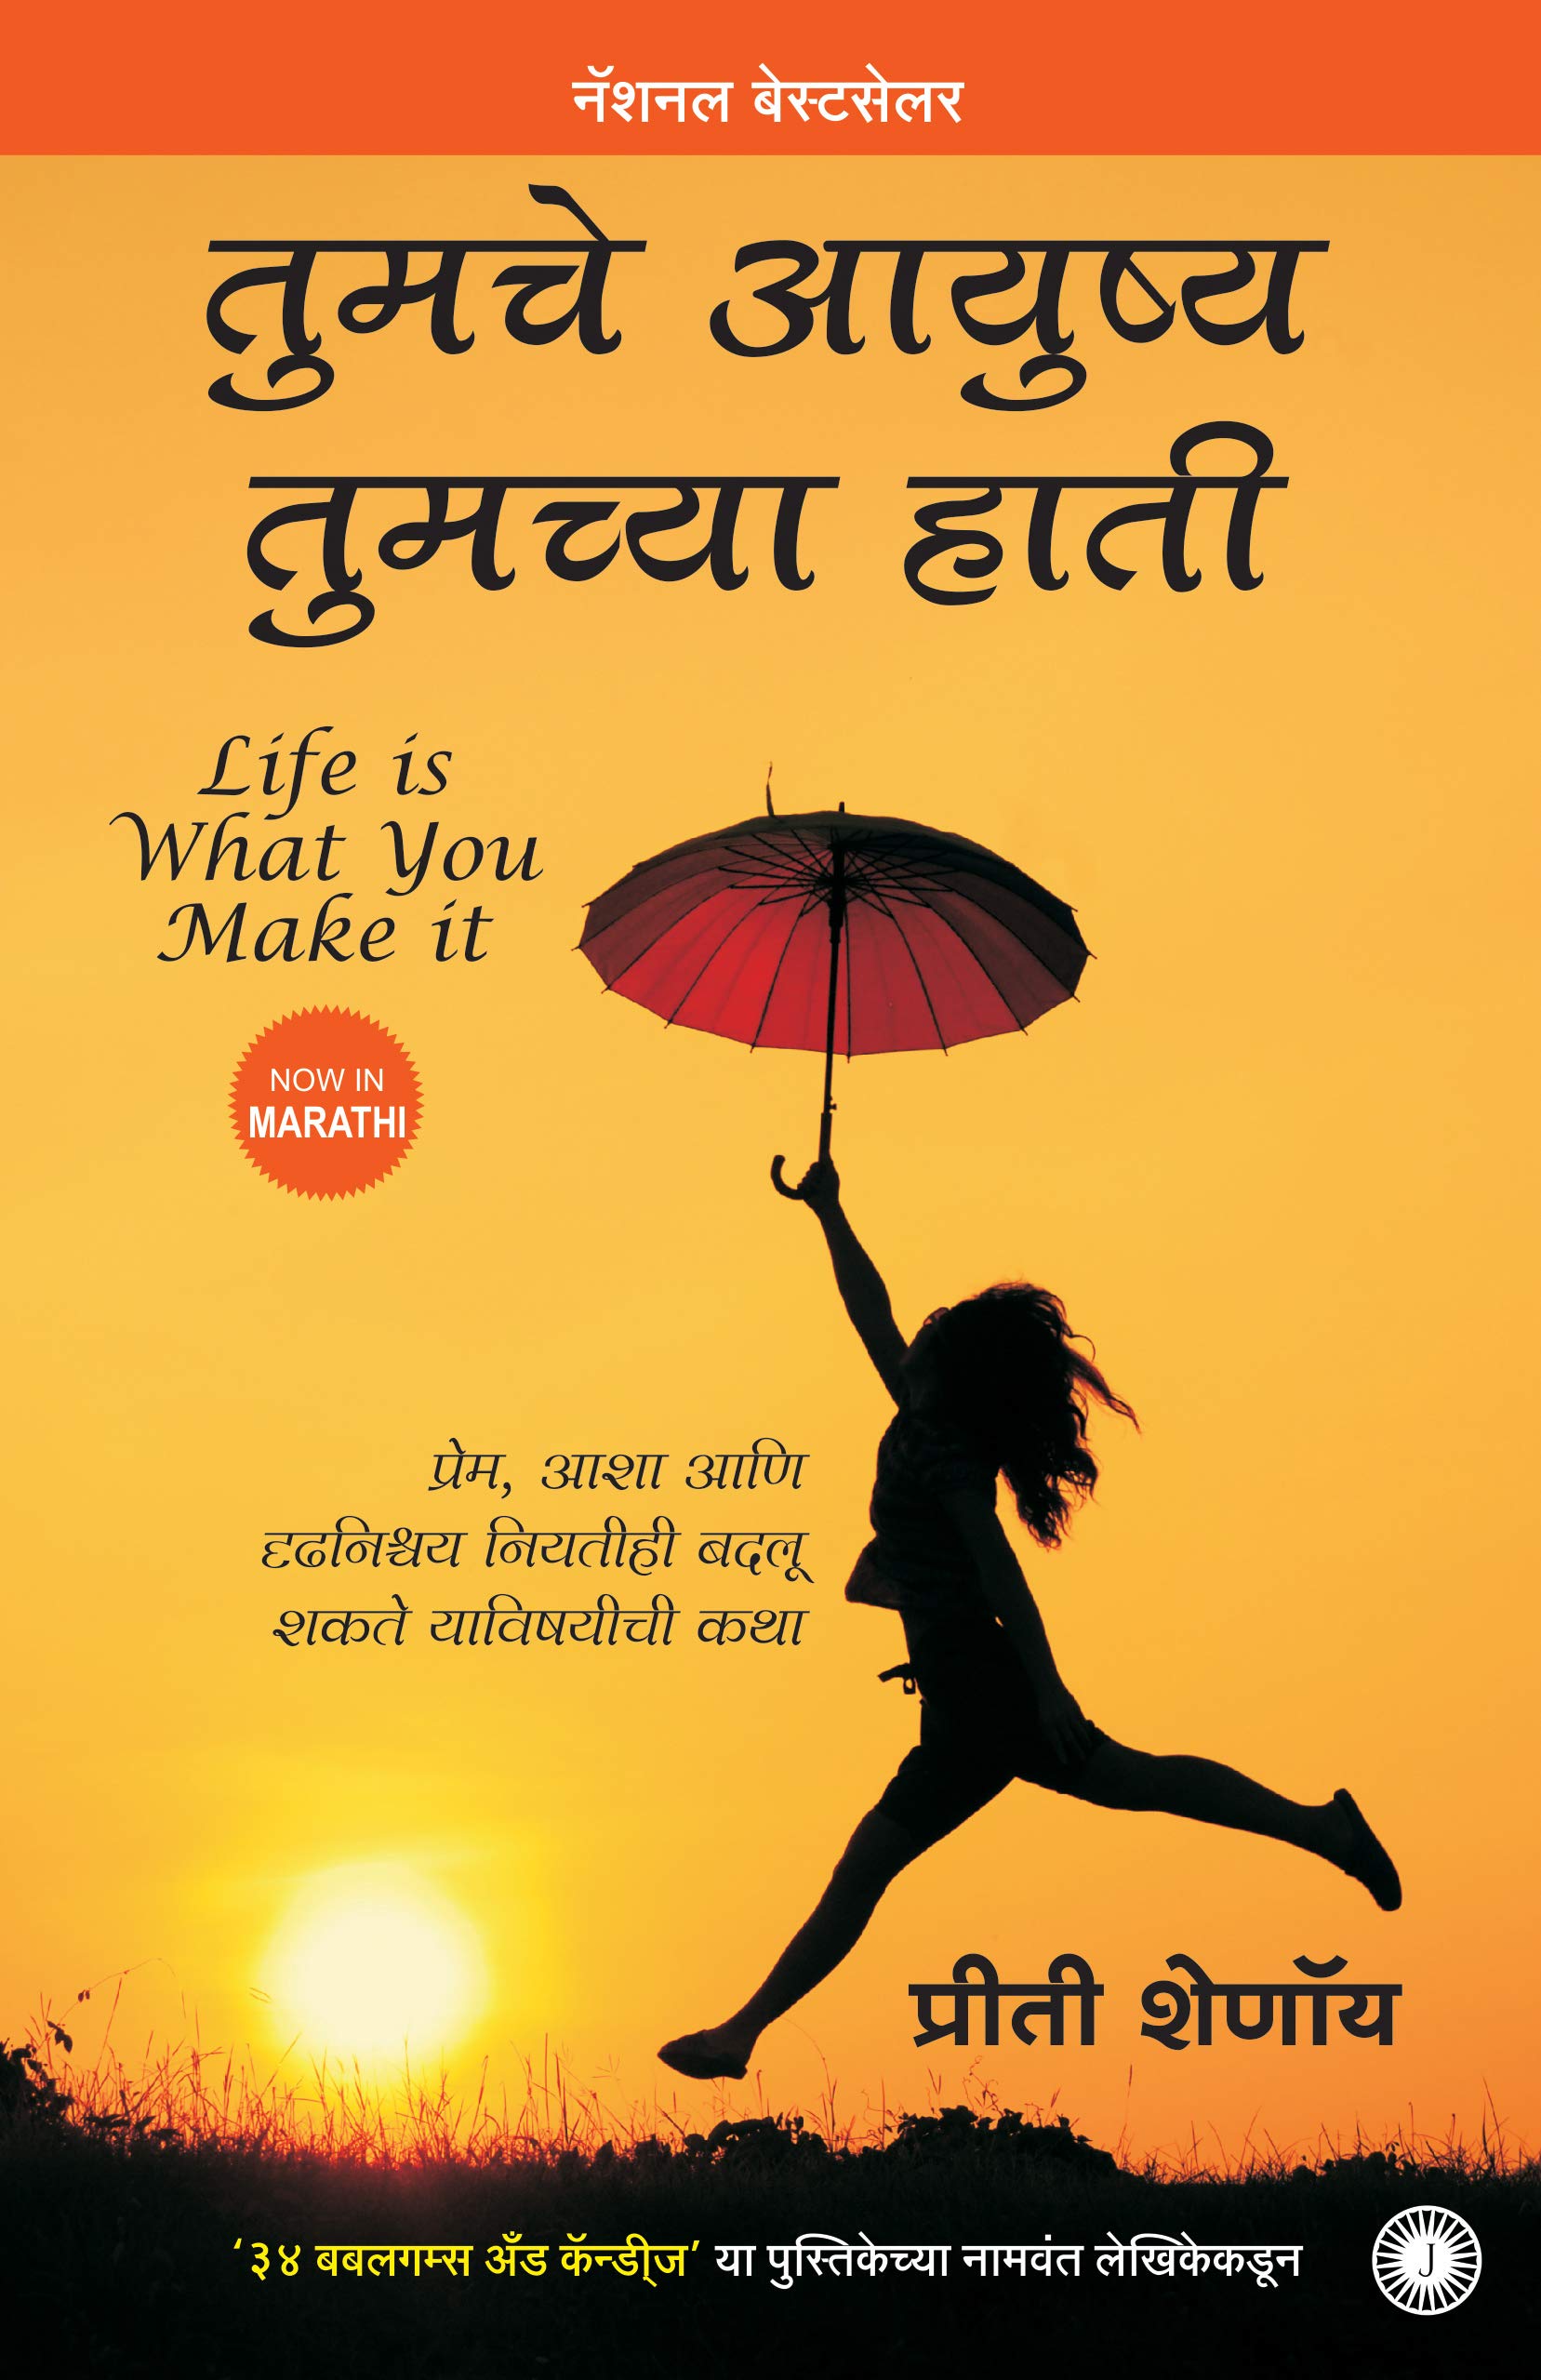 life-is-what-you-make-it-marathi